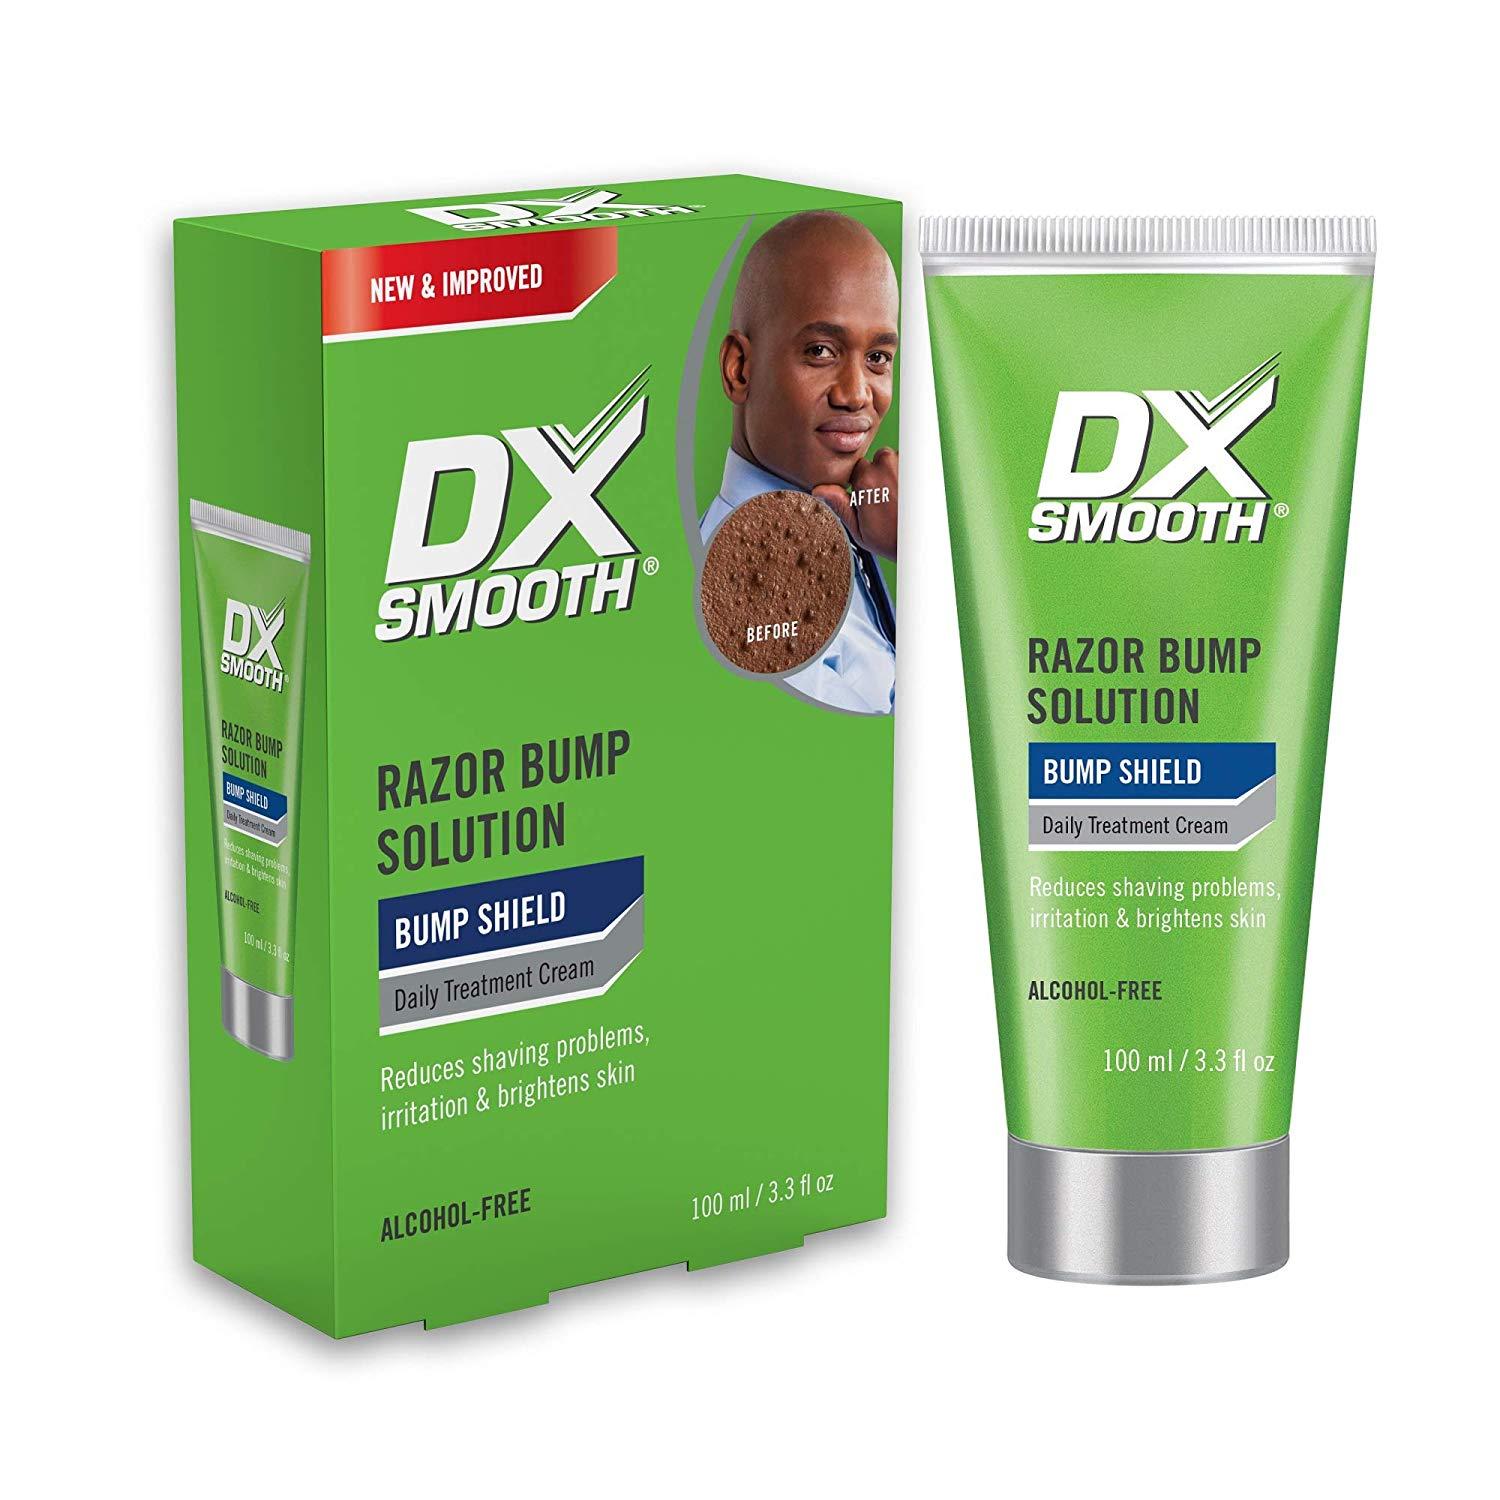 Shaving and Personal Care Products Logo - DX Smooth for Men Bump Shield - Razor Bump Solution & Daily ...